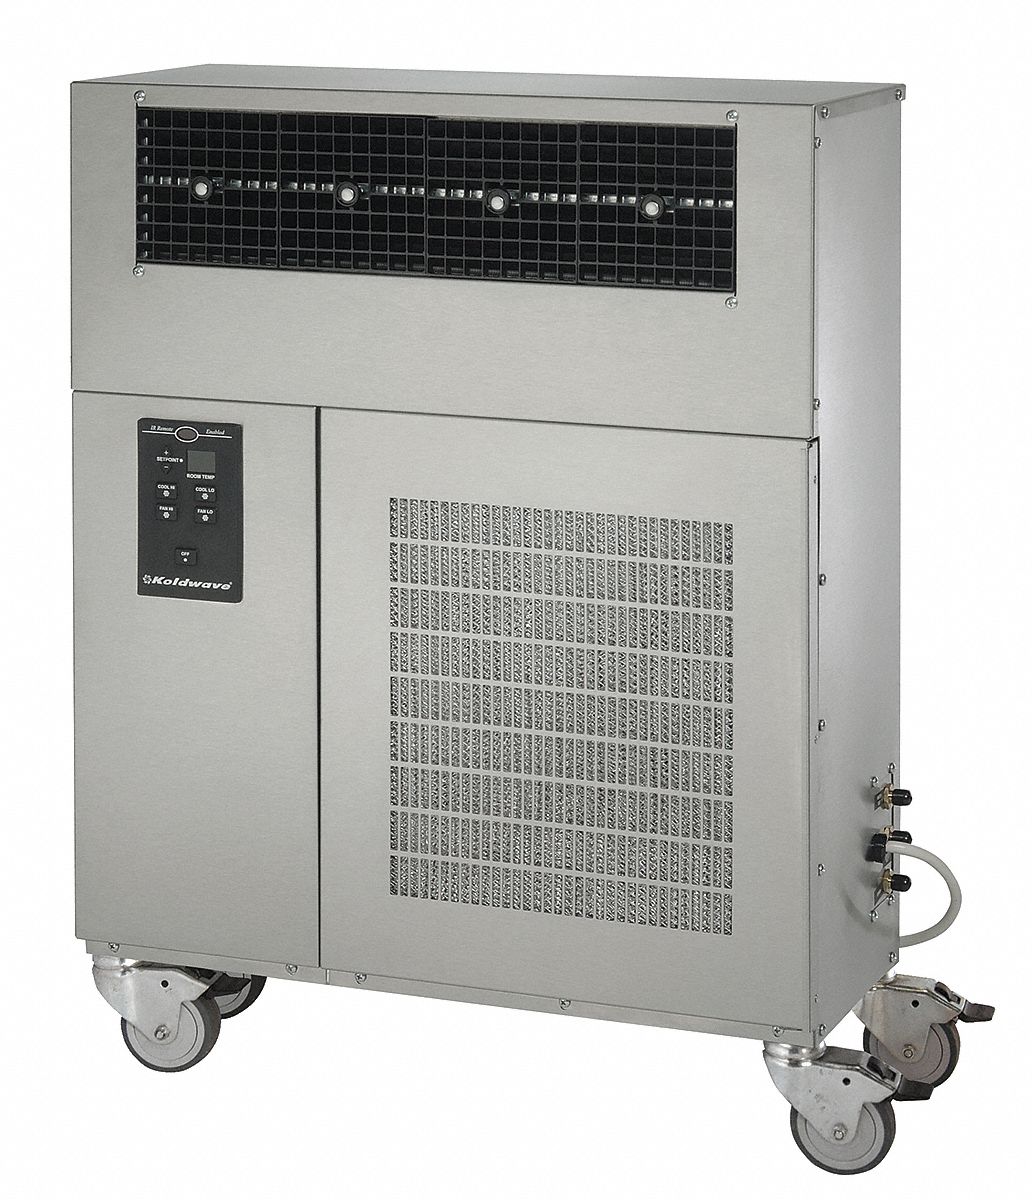 Portable Air Conditioner: 10,800 BtuH Cooling Capacity, 400 to 450 sq ft, 1 Phase